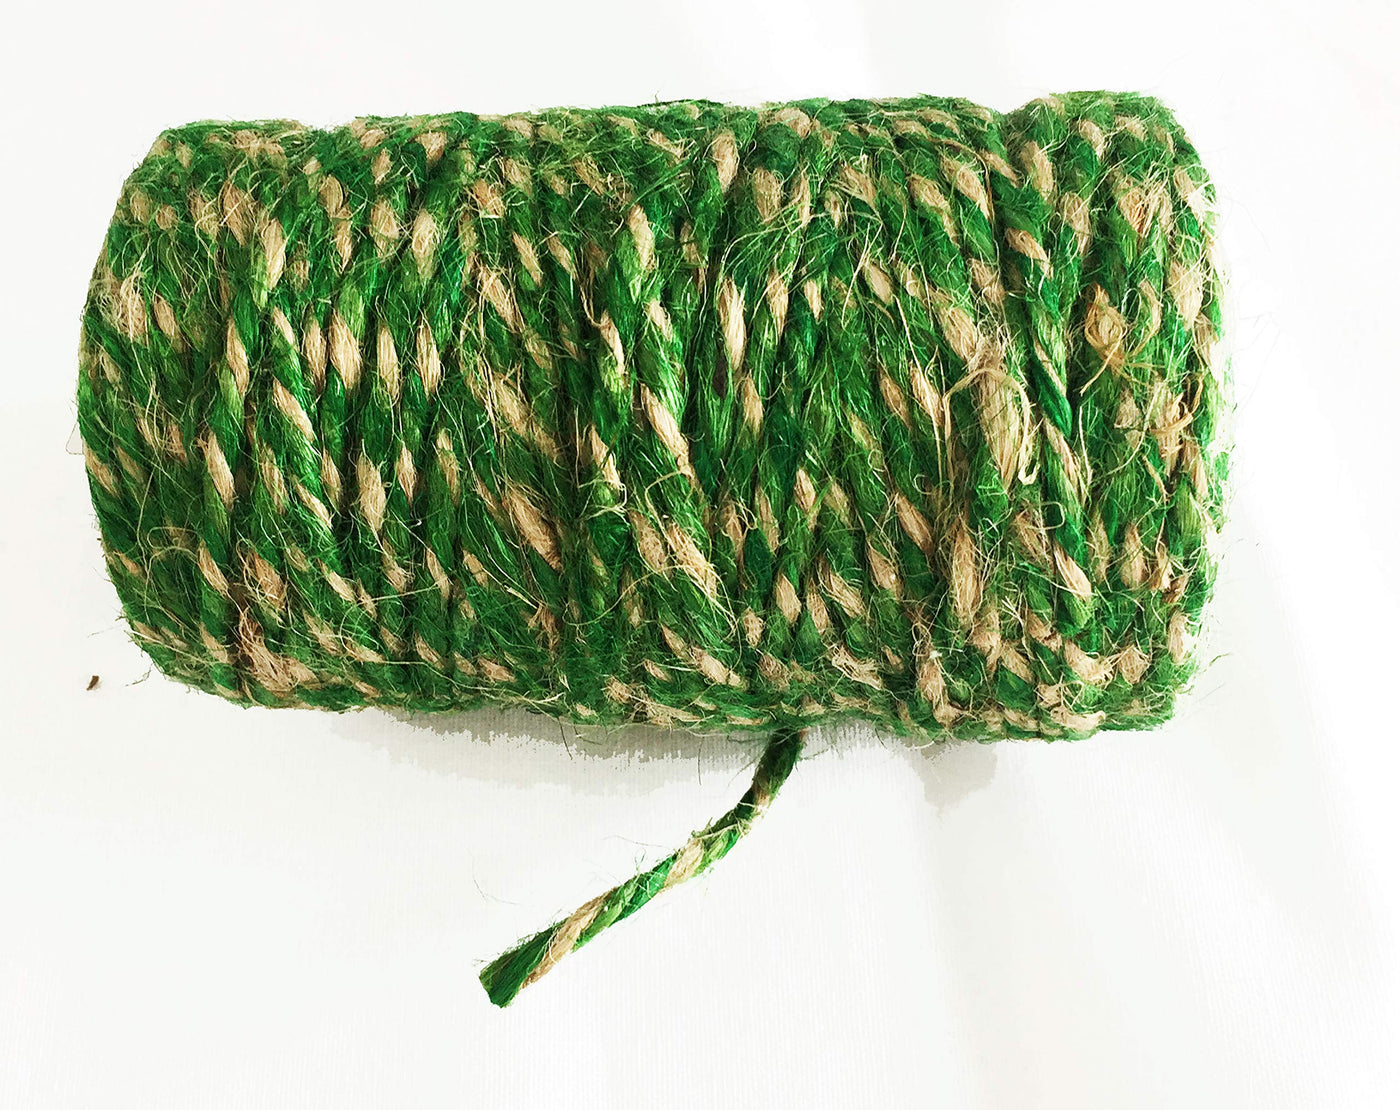 AAYU Jute Twine 200 Feet 3 Ply Green and Natural Colored Twisted Hemp Yarn for Arts and Crafts Packing Gift Wrapping Decorations Gardening